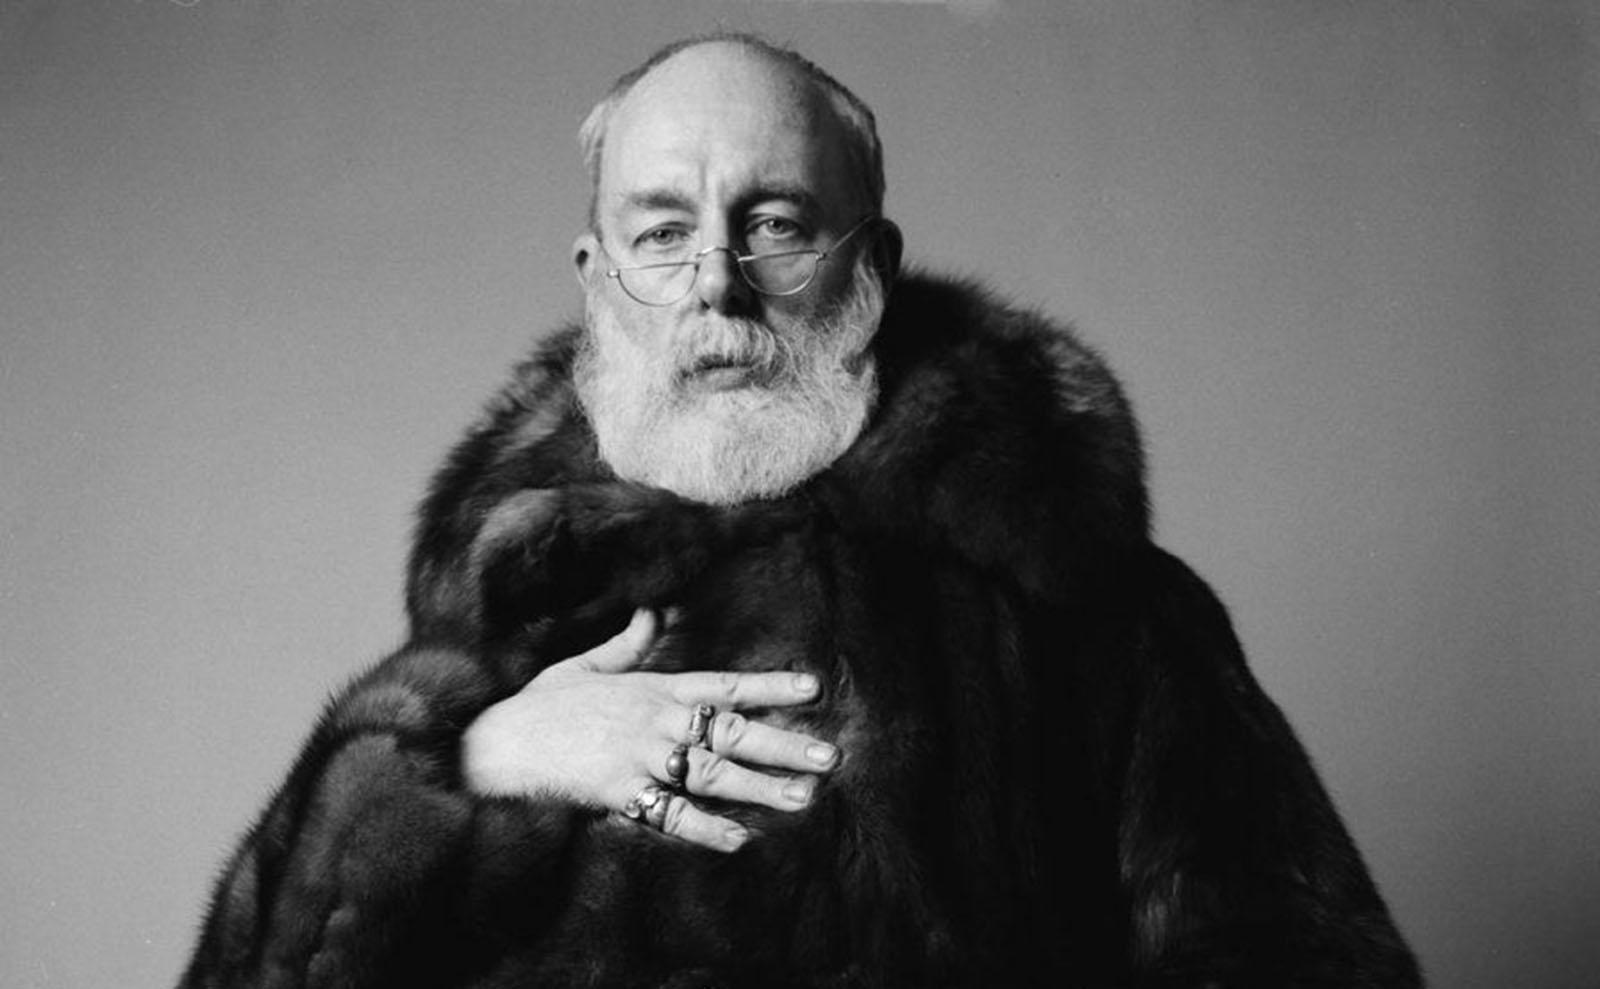 black and white portrait of edward gorey in a fur coat